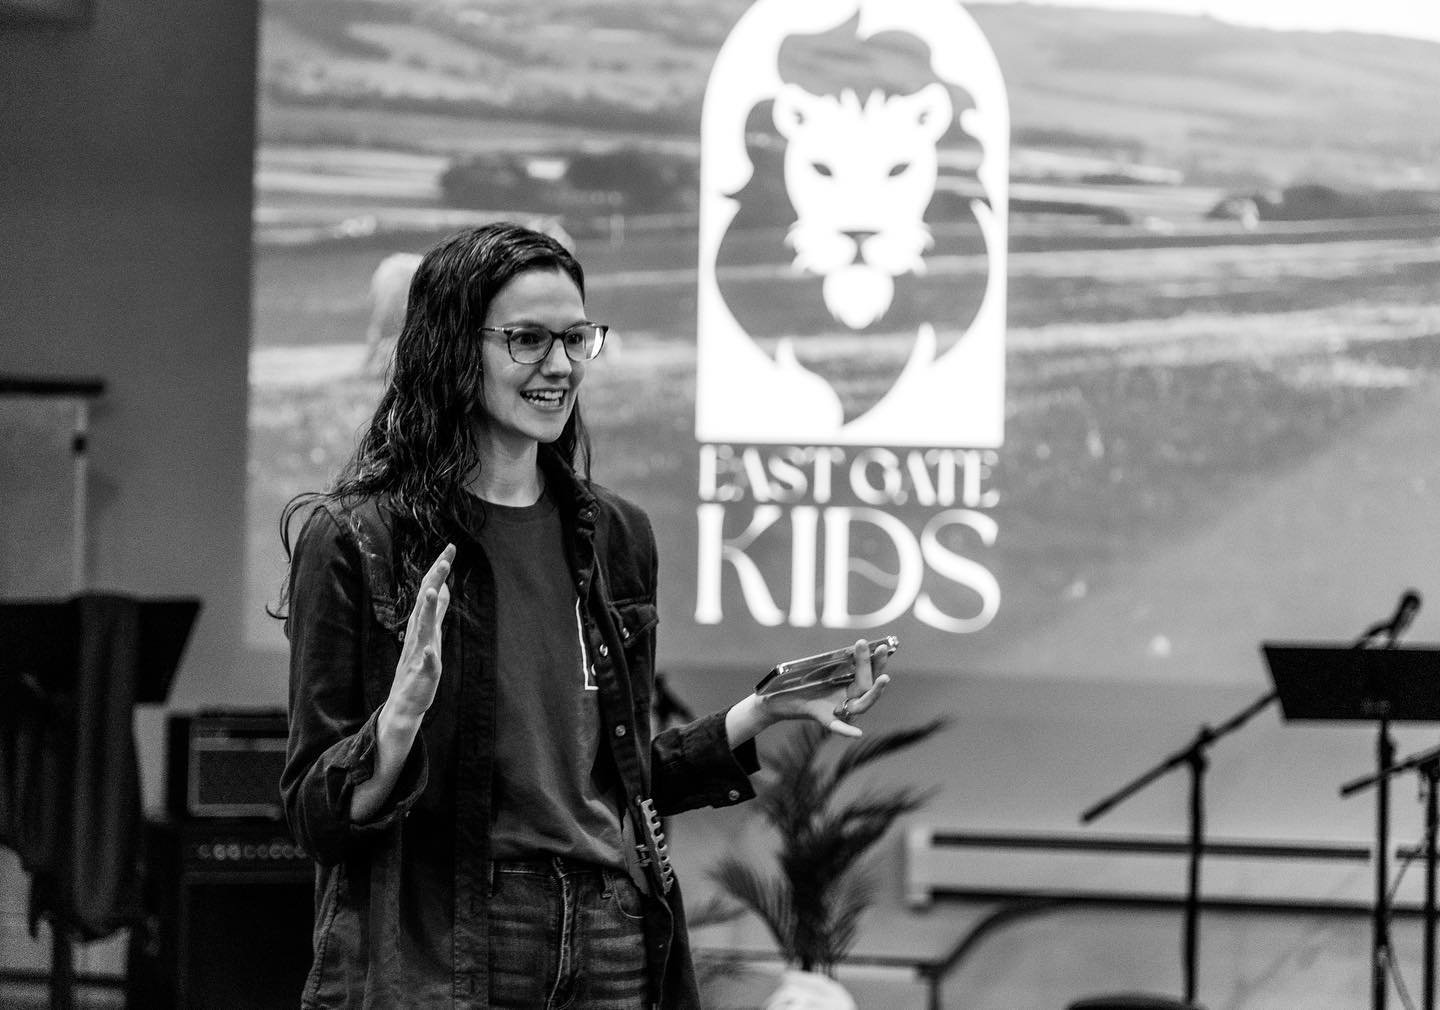 What greater joy is there than learning how to encounter Jesus through play, worship, and learning how to read our Bibles? Our East Gate Kids are eager to hear God&rsquo;s voice and to hide His Word in their hearts. Today, we&rsquo;ll be learning abo